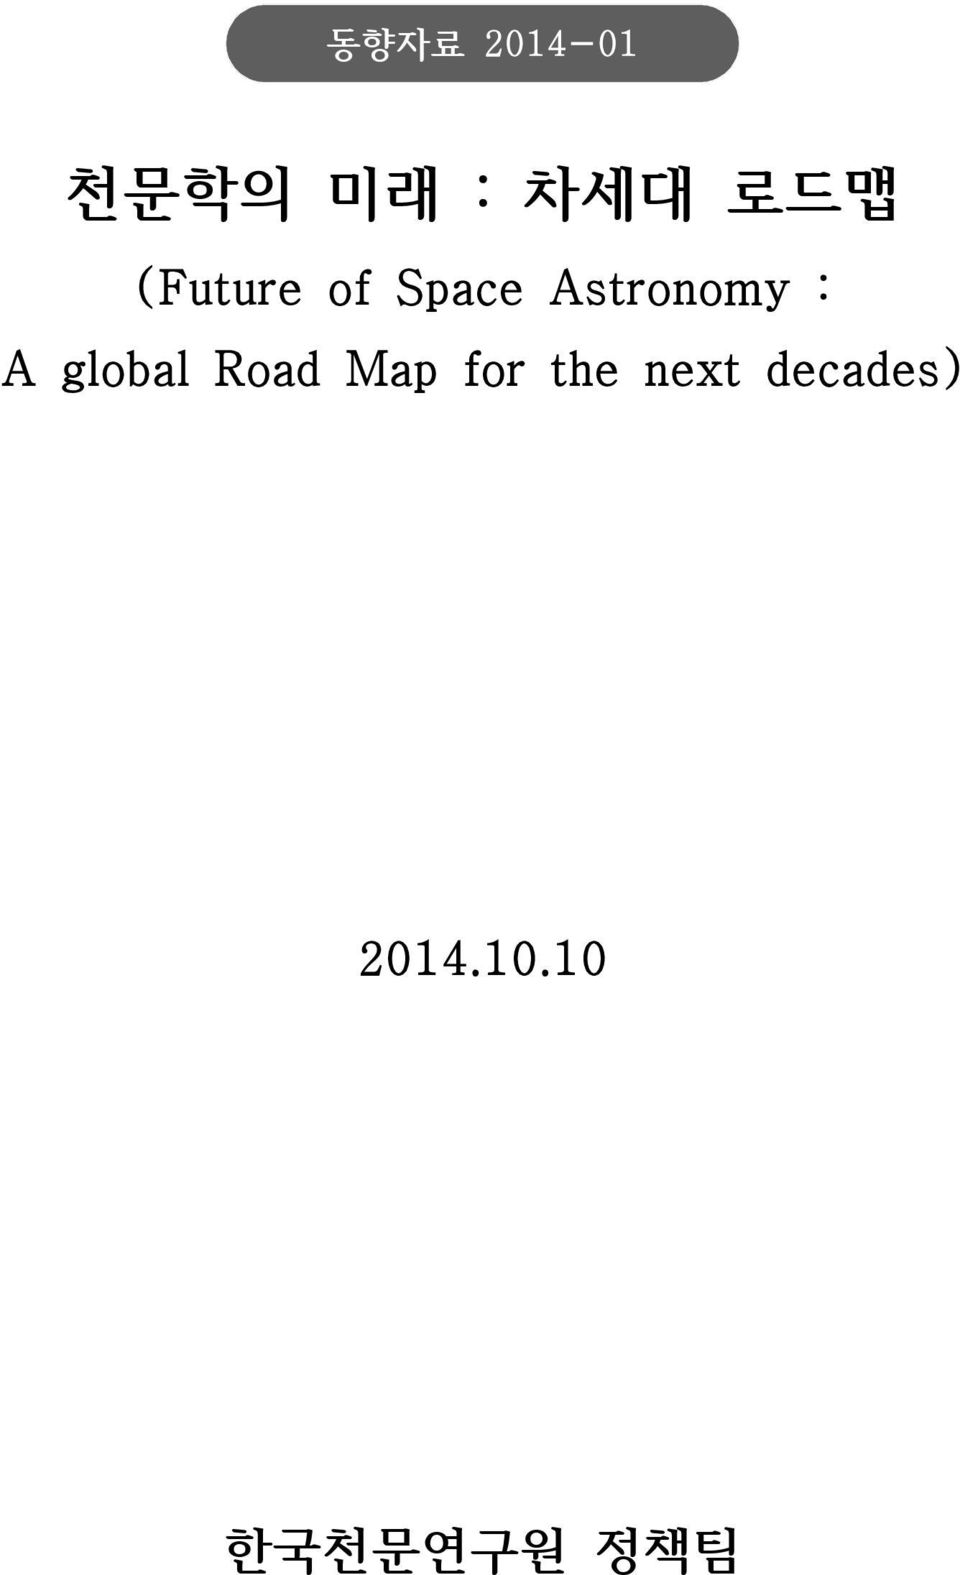 global Road Map for the next